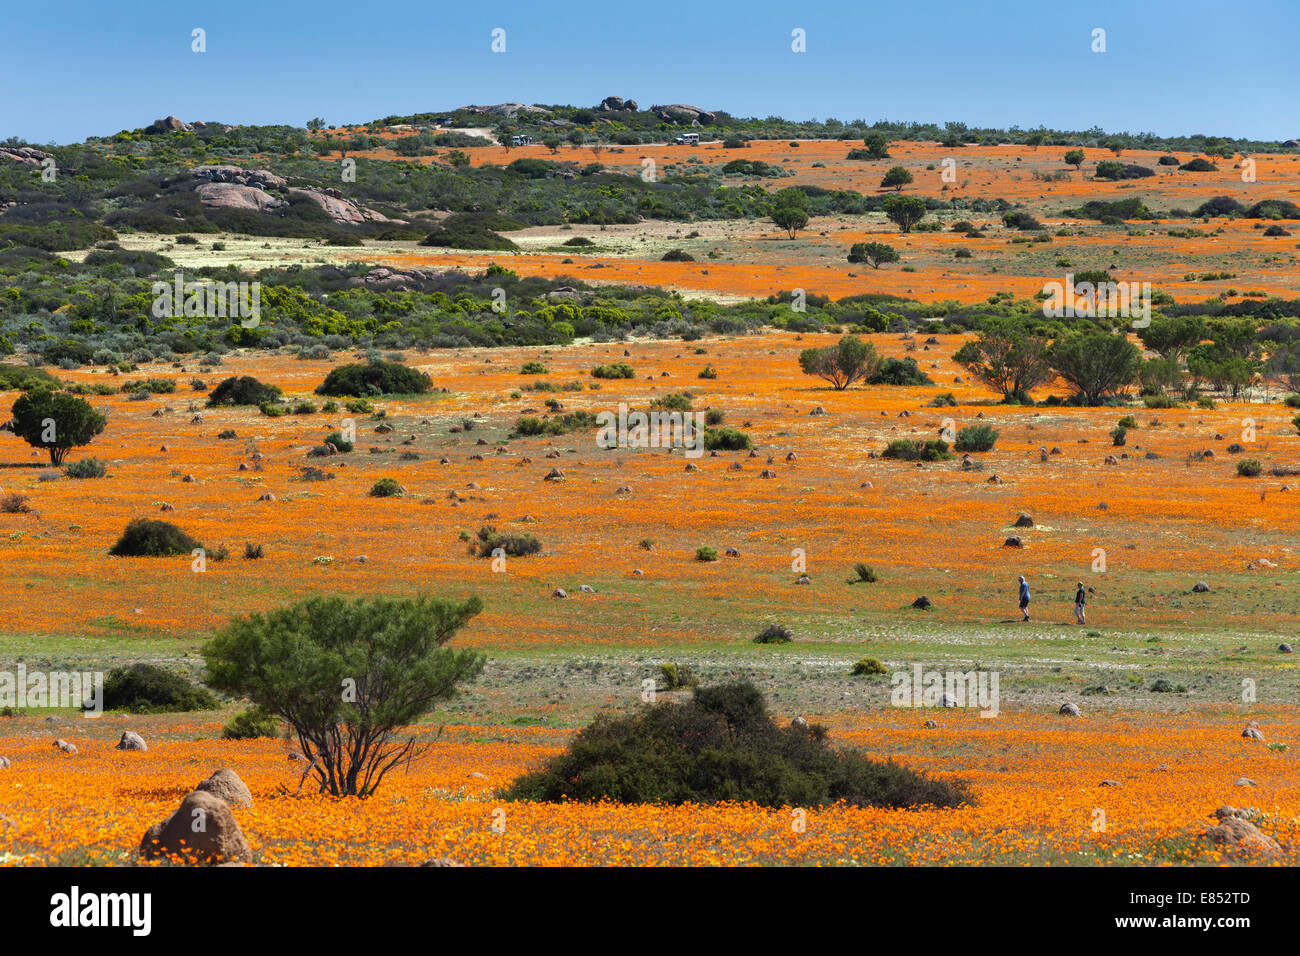 Couple walking through fields of flowers in the Namaqua National Park in South Africa. Stock Photo